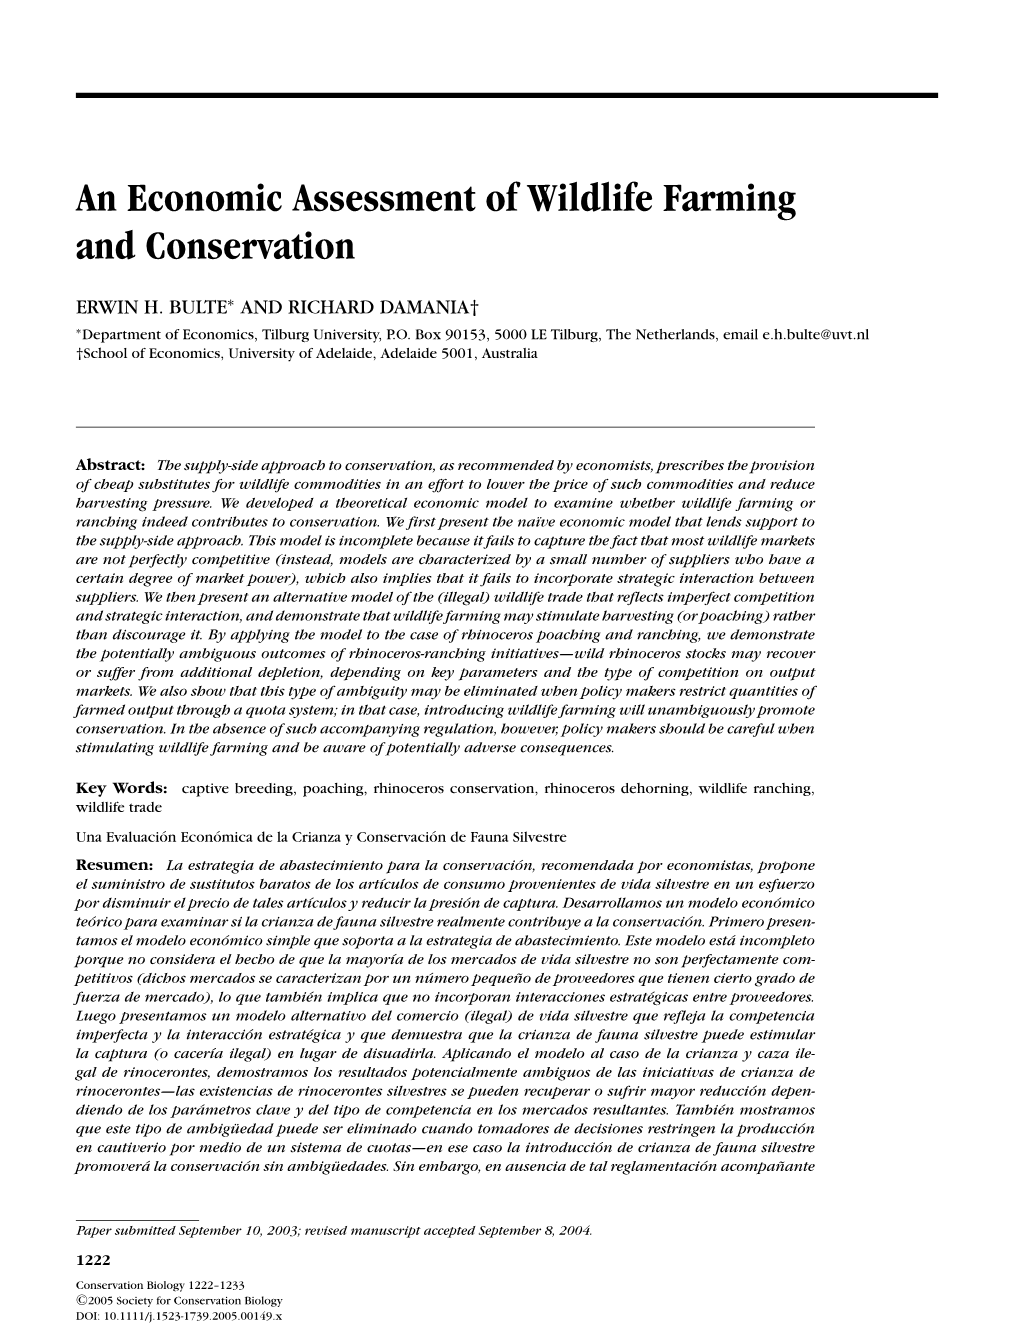 An Economic Assessment of Wildlife Farming and Conservation